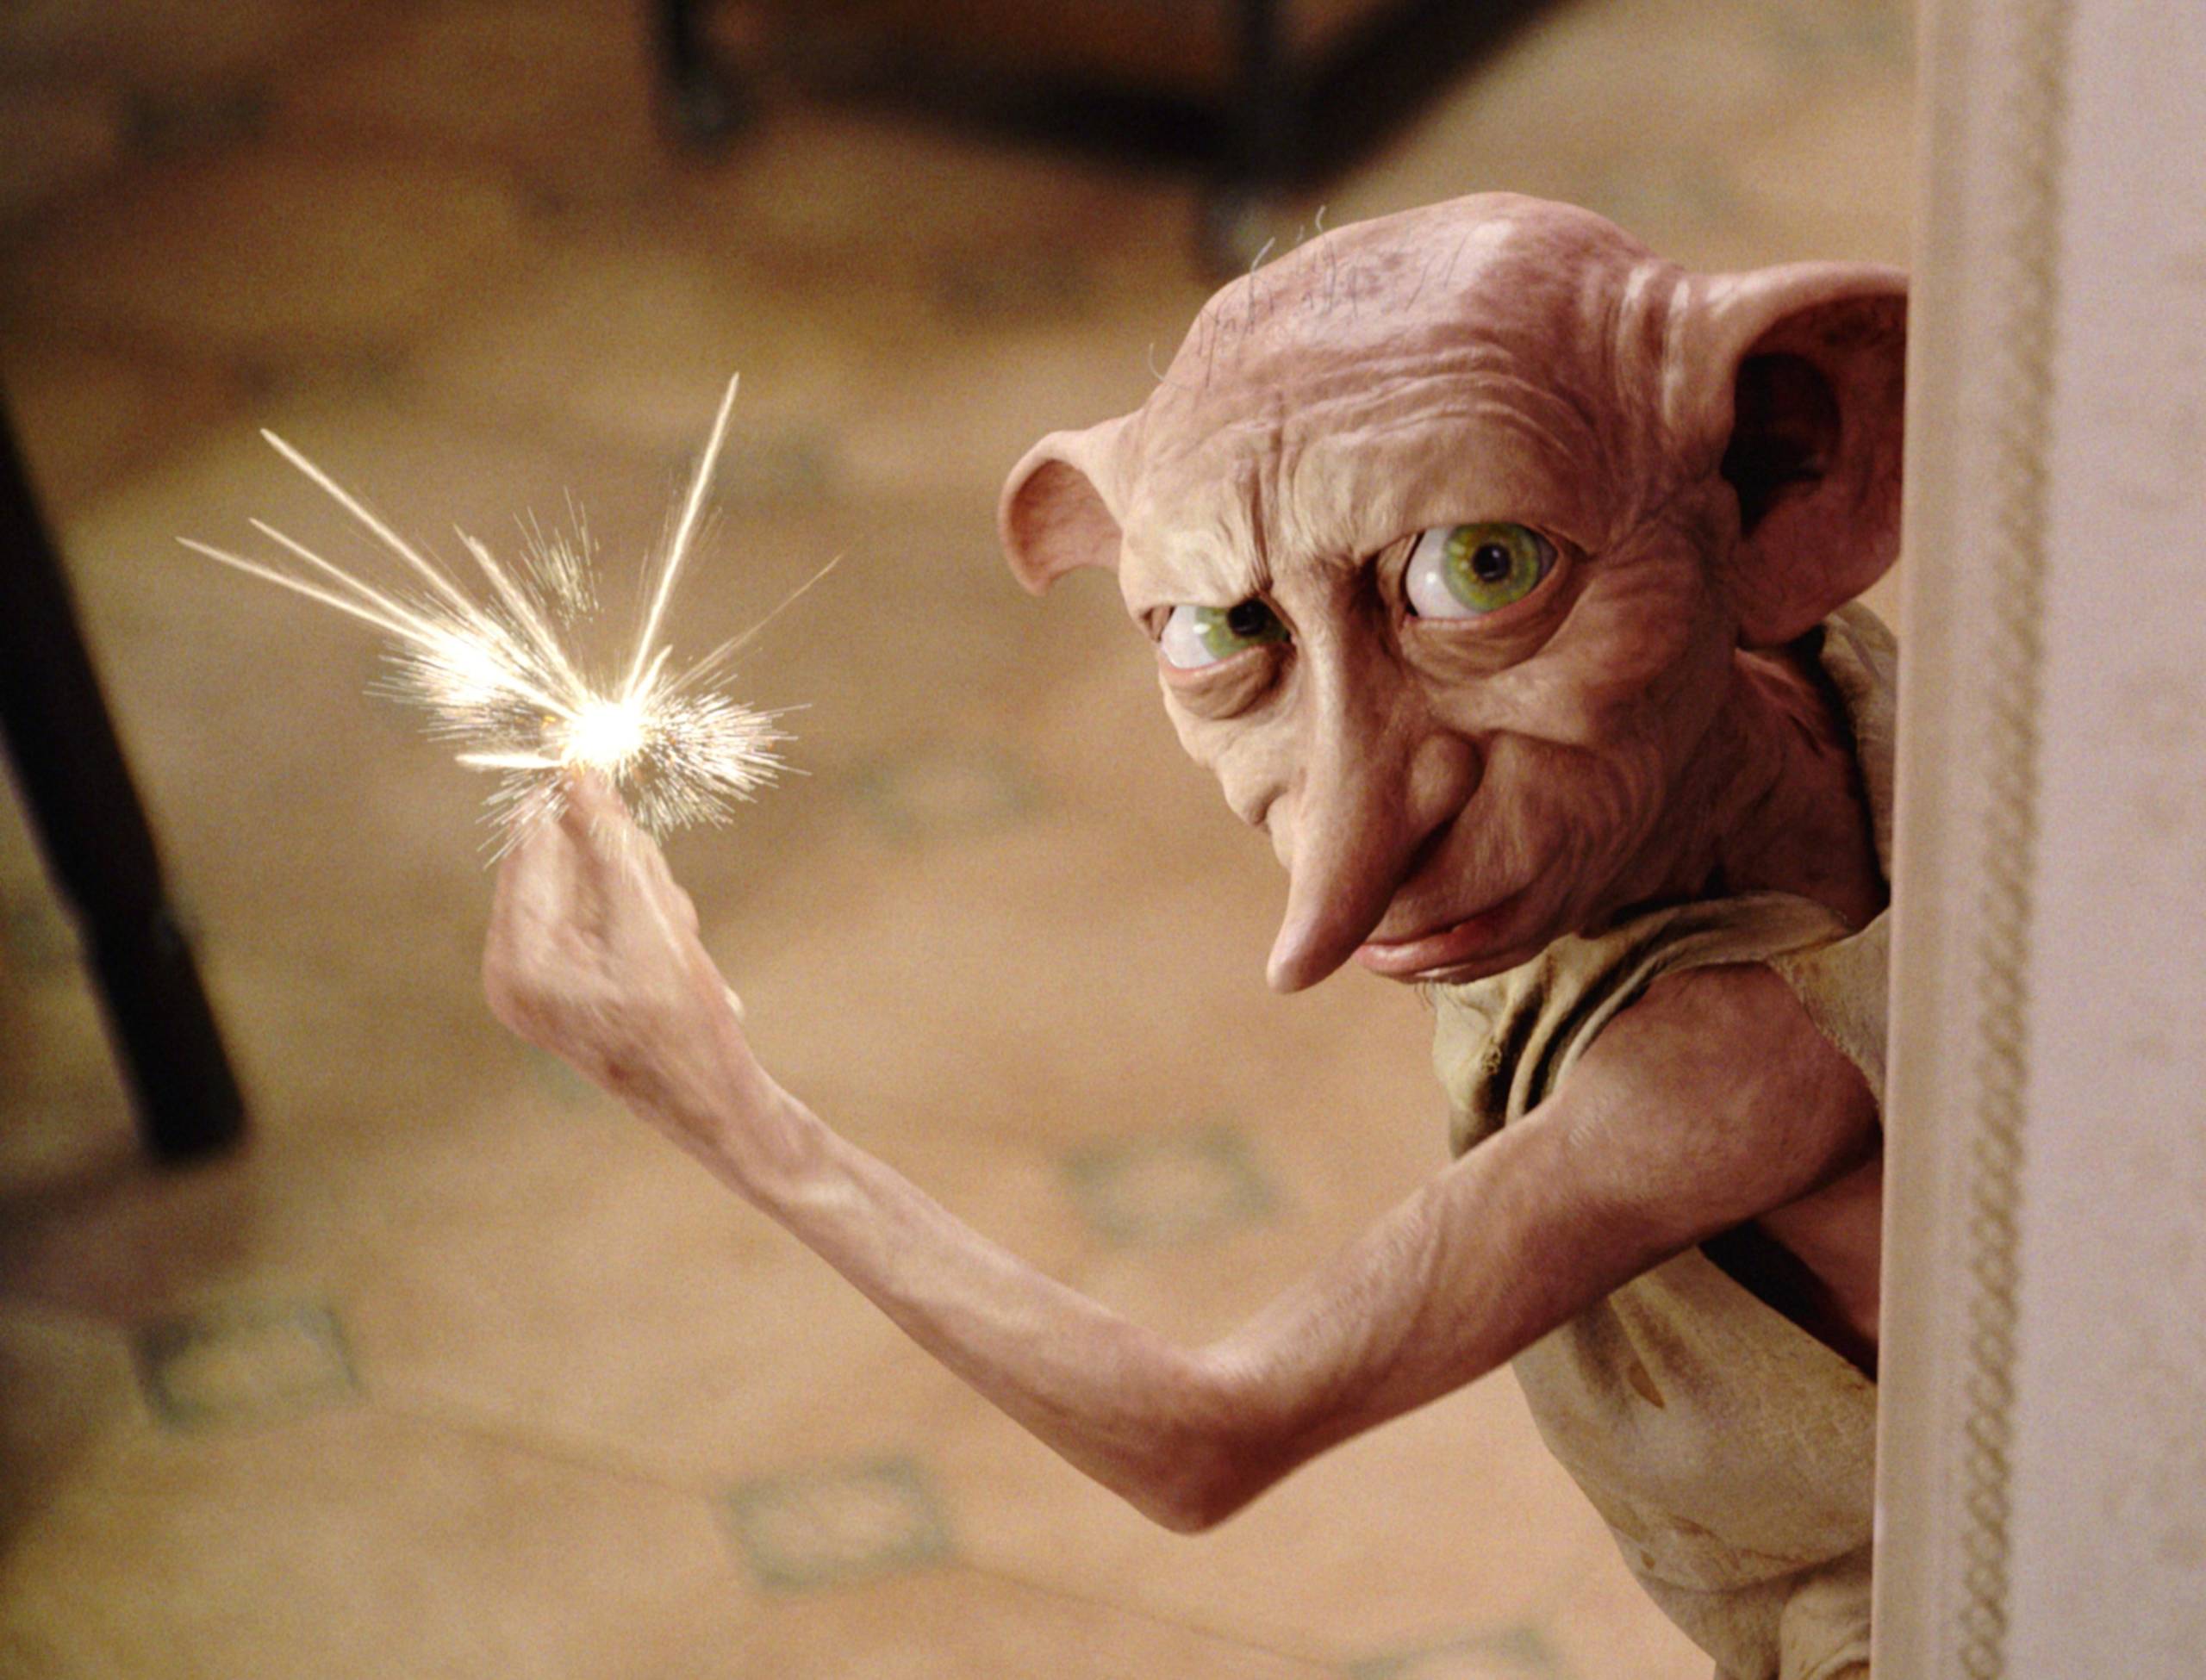 Dobby clicking his fingers to cast a spell 